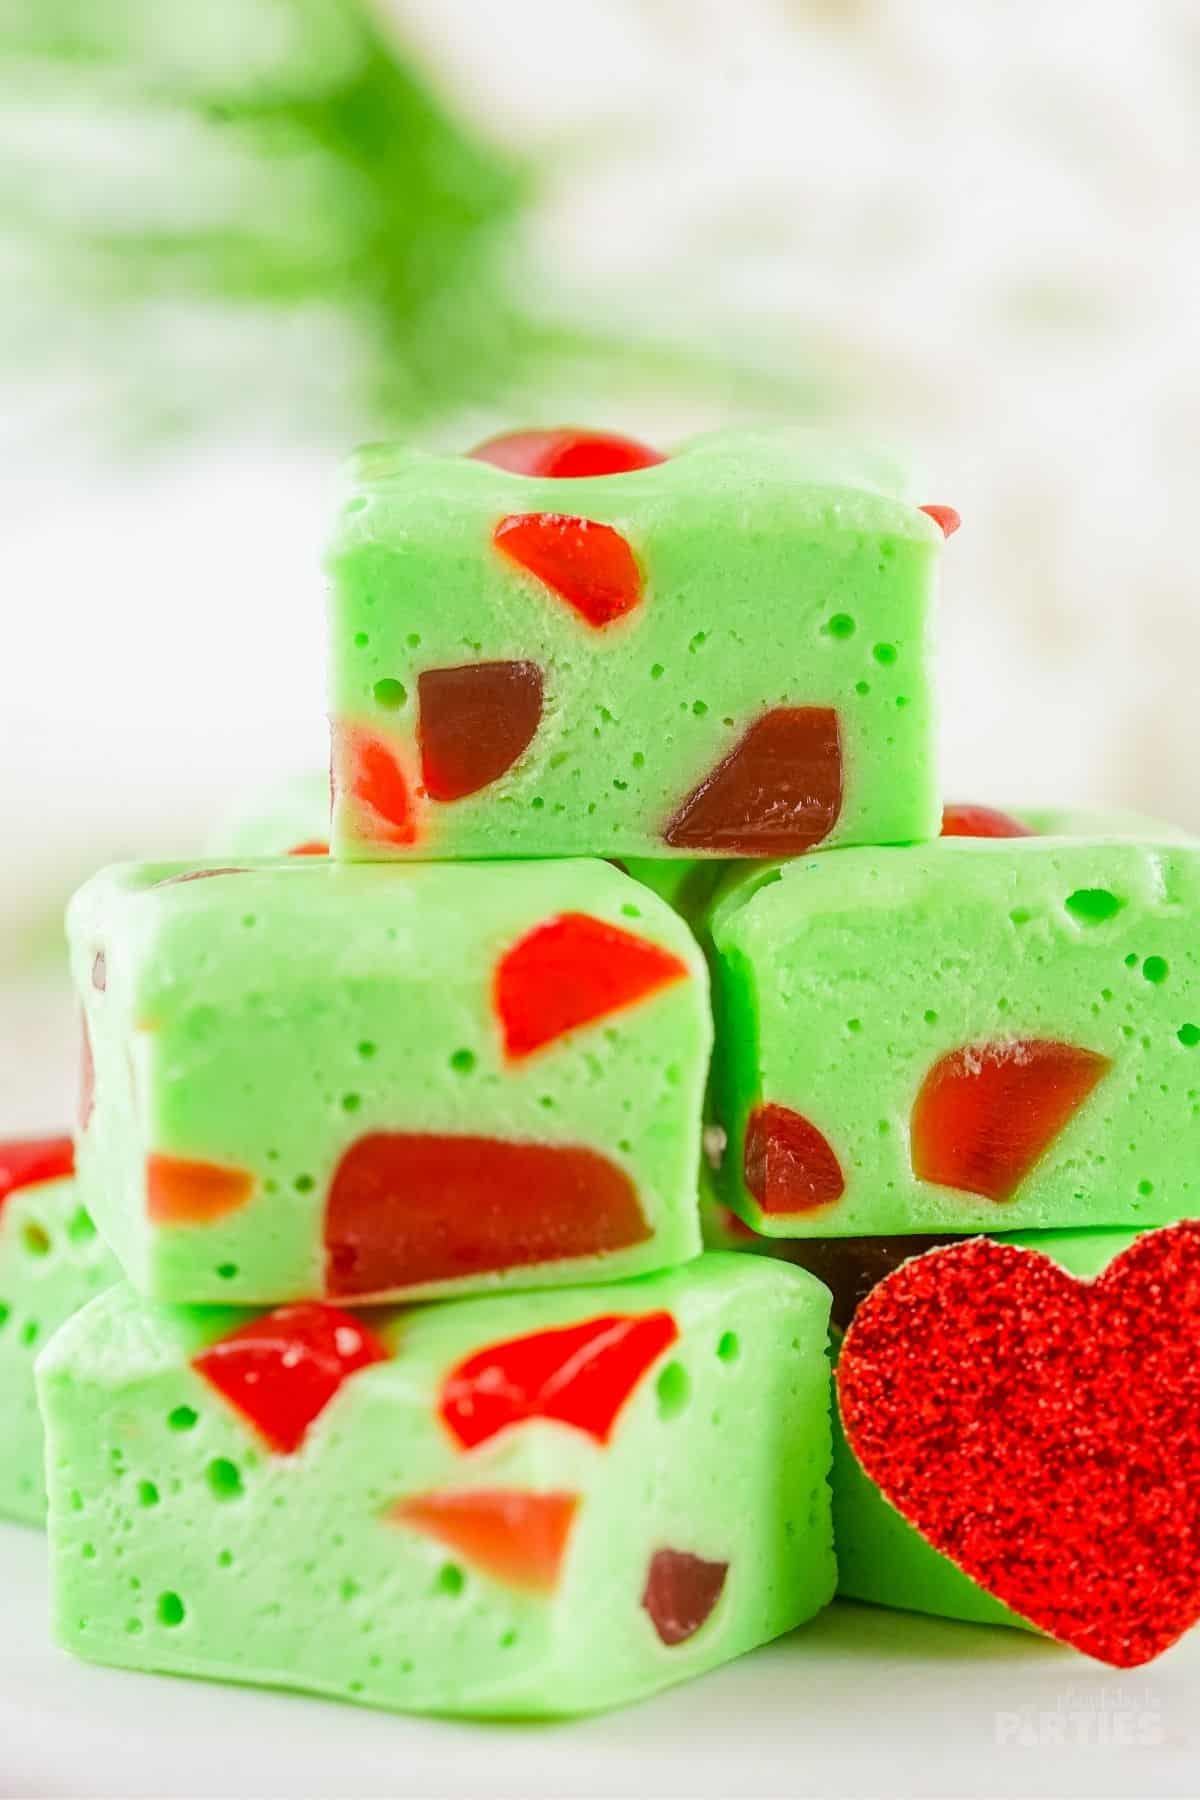 Upon closer inspection, you can see the airy pockets in the green nougat with gumdrops.